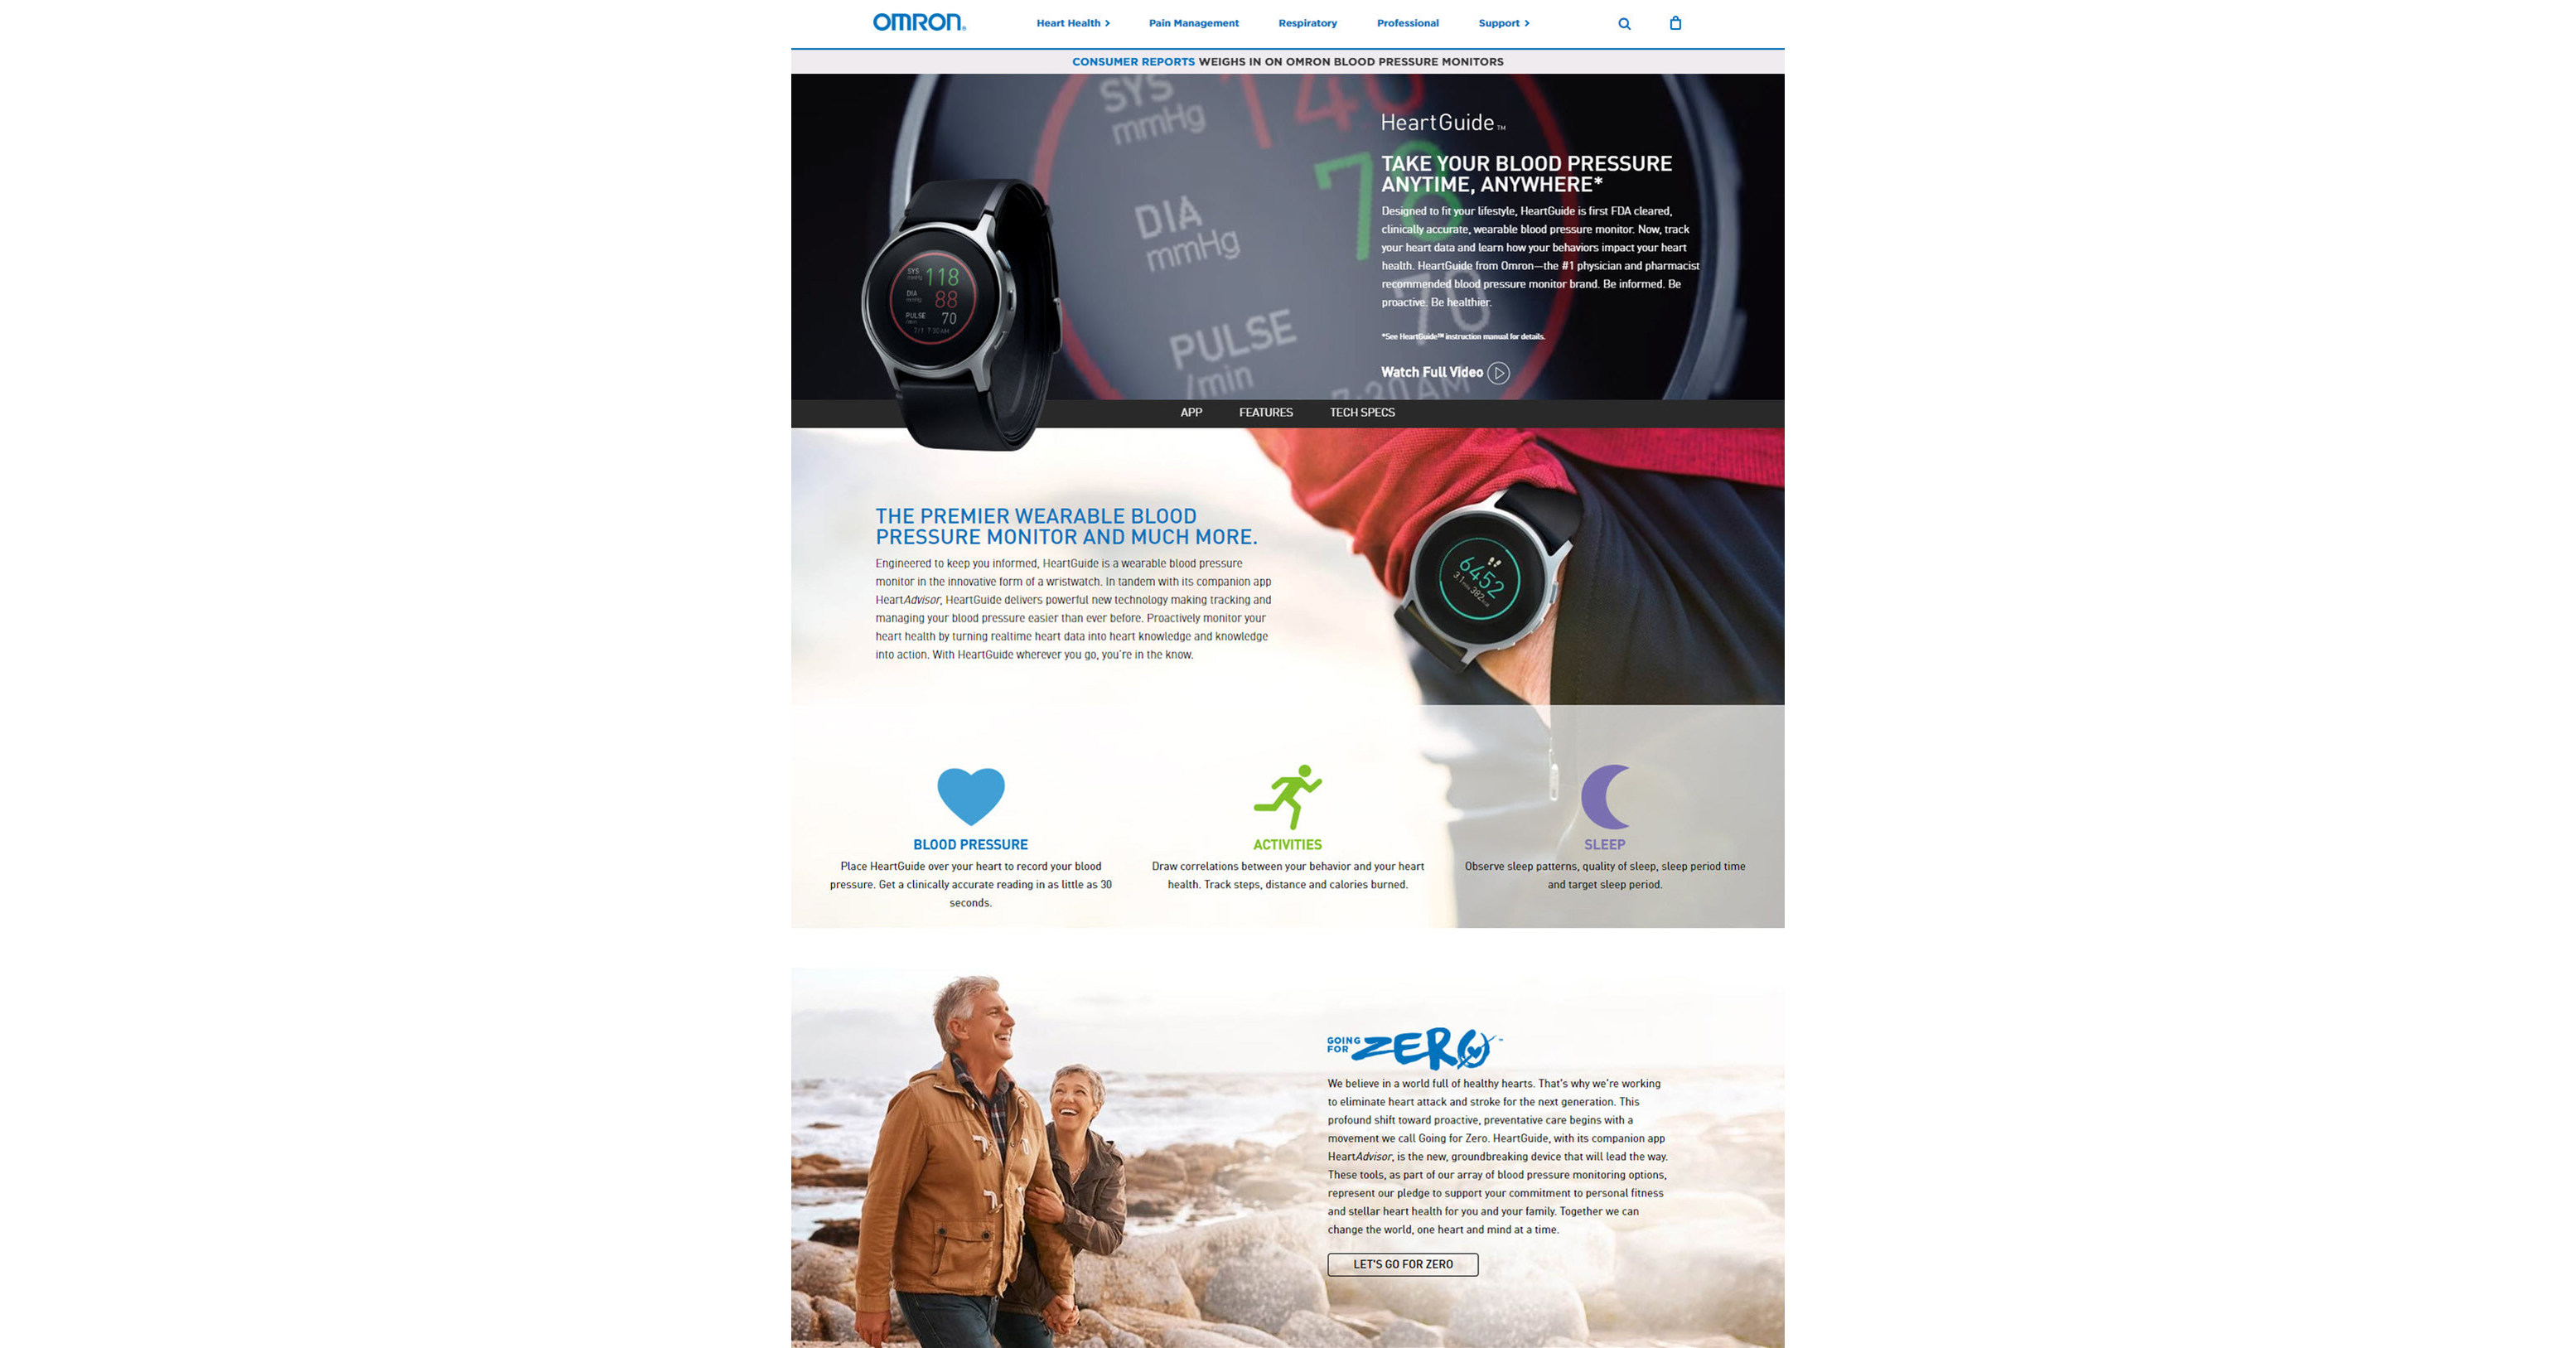 Omron launches HeartGuide watch-based wearable BP monitor - MassDevice